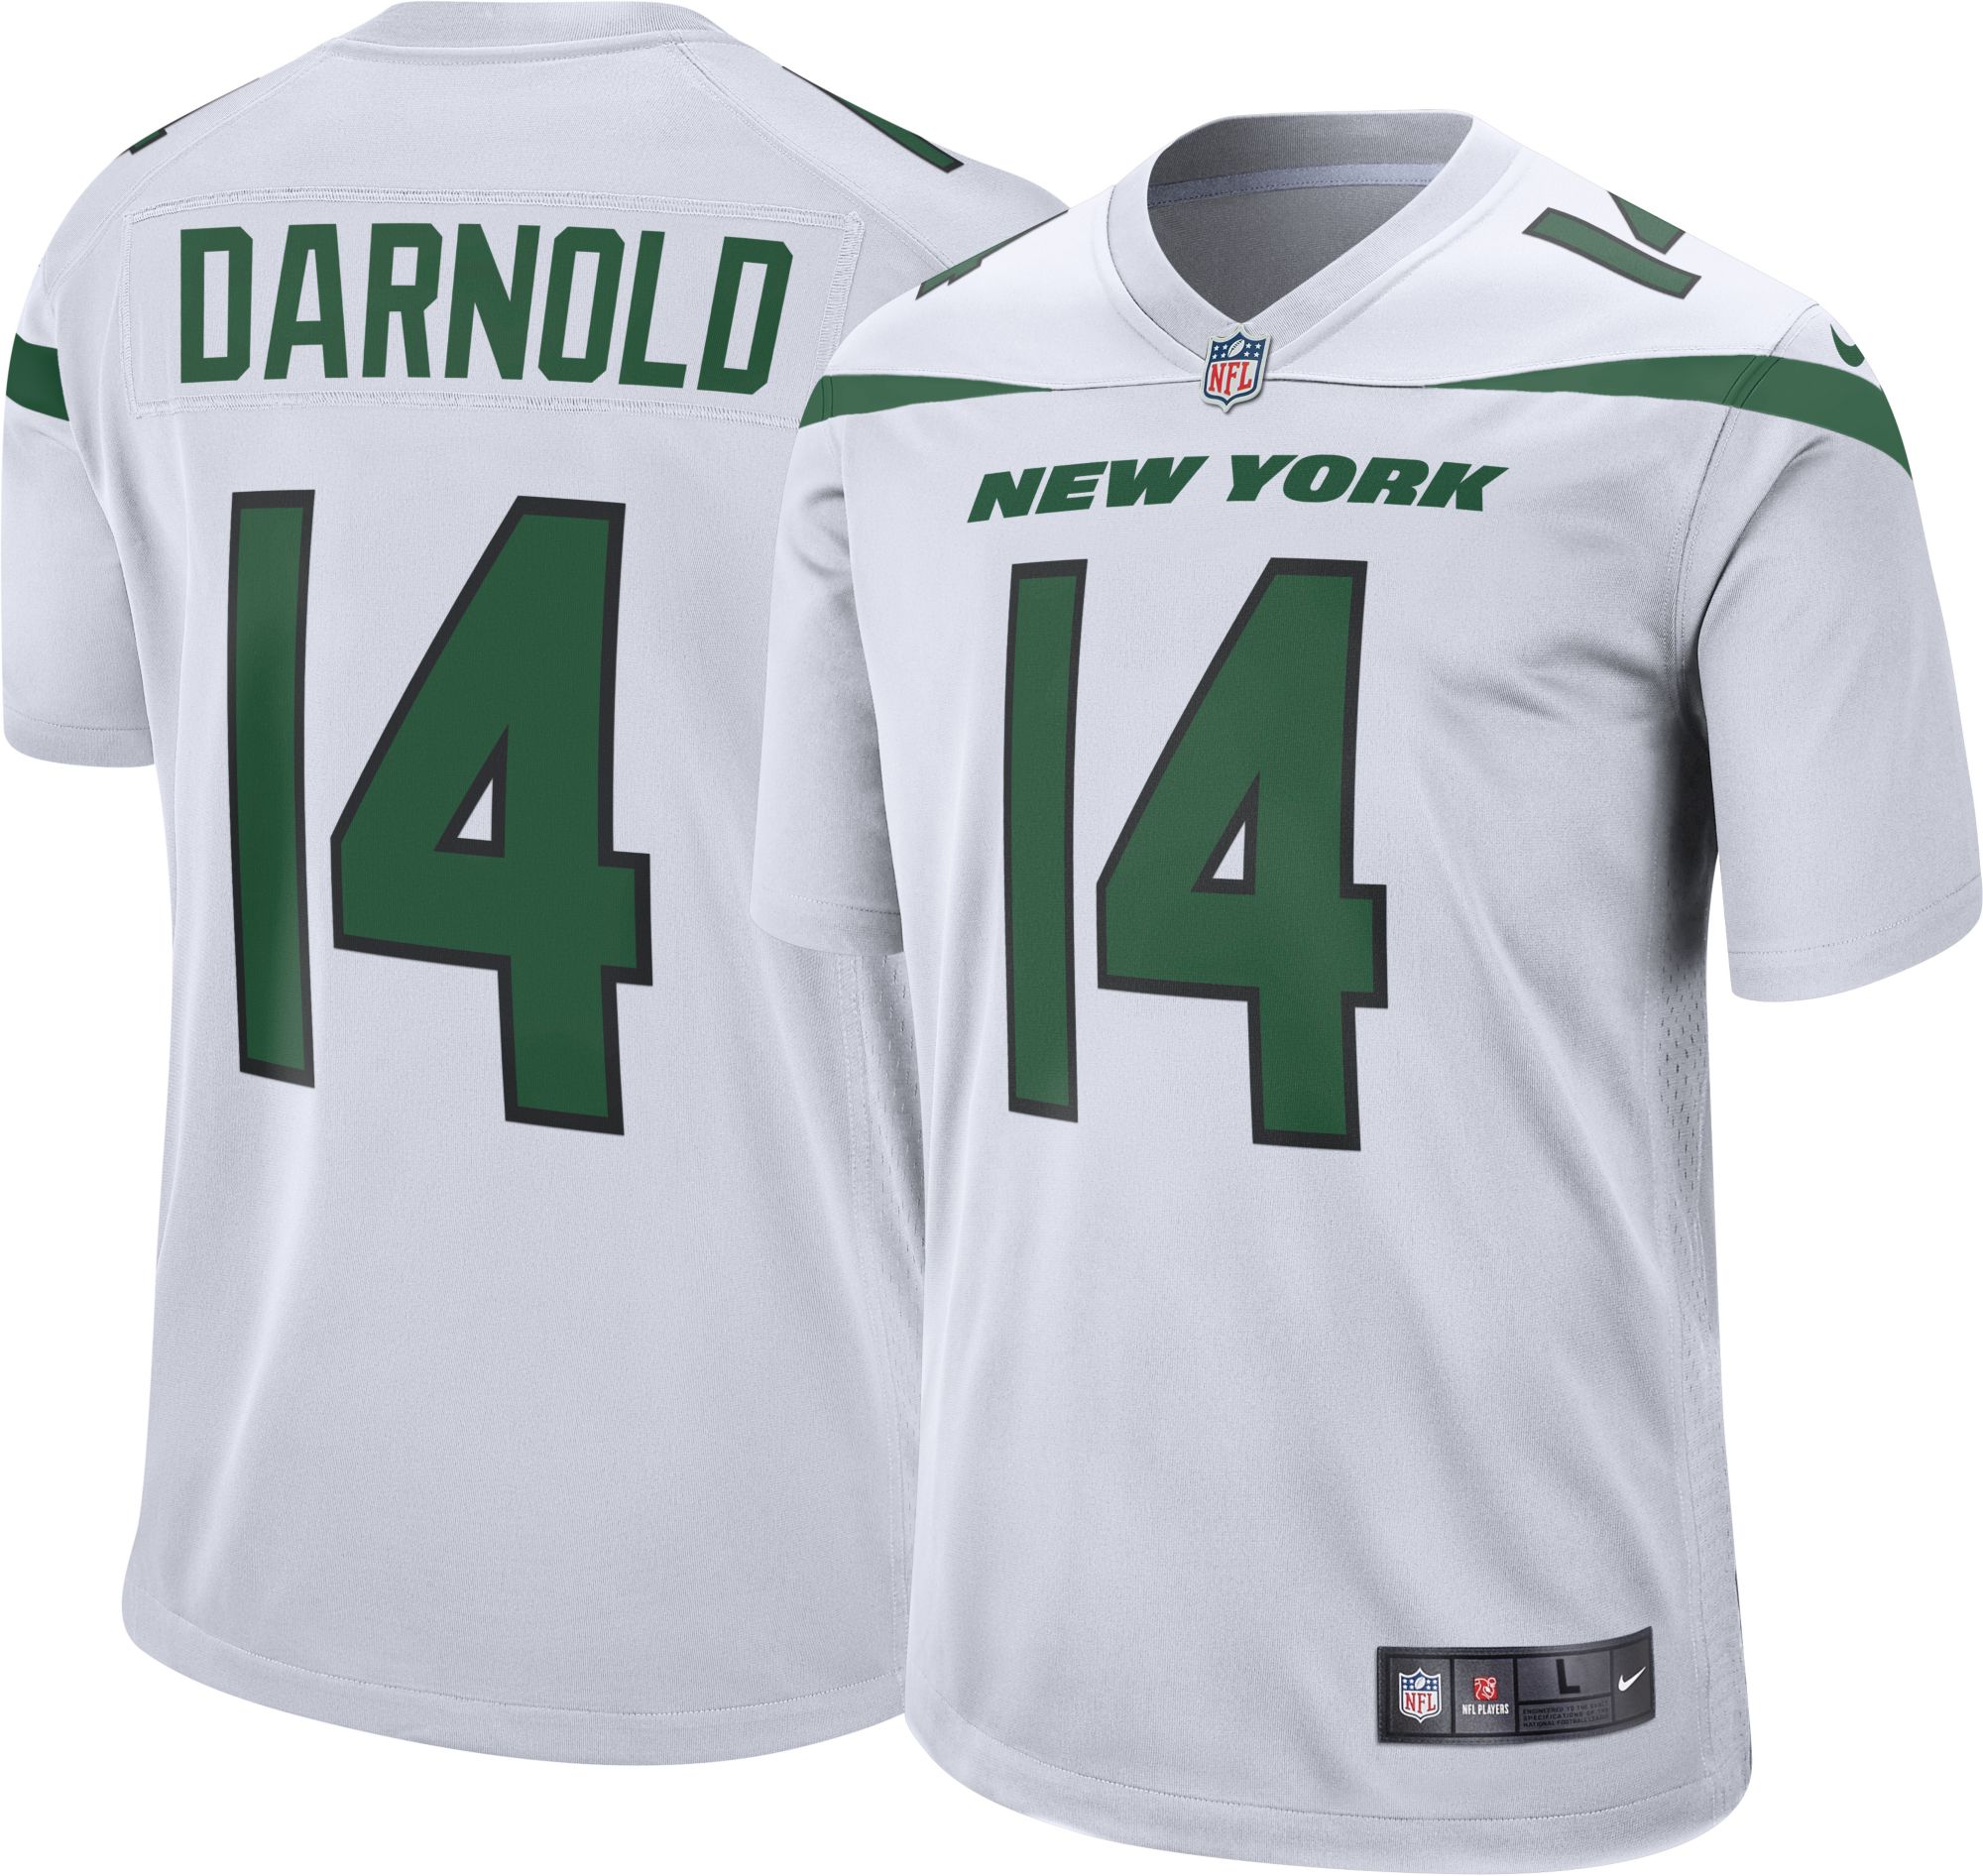 best selling new york jets jersey